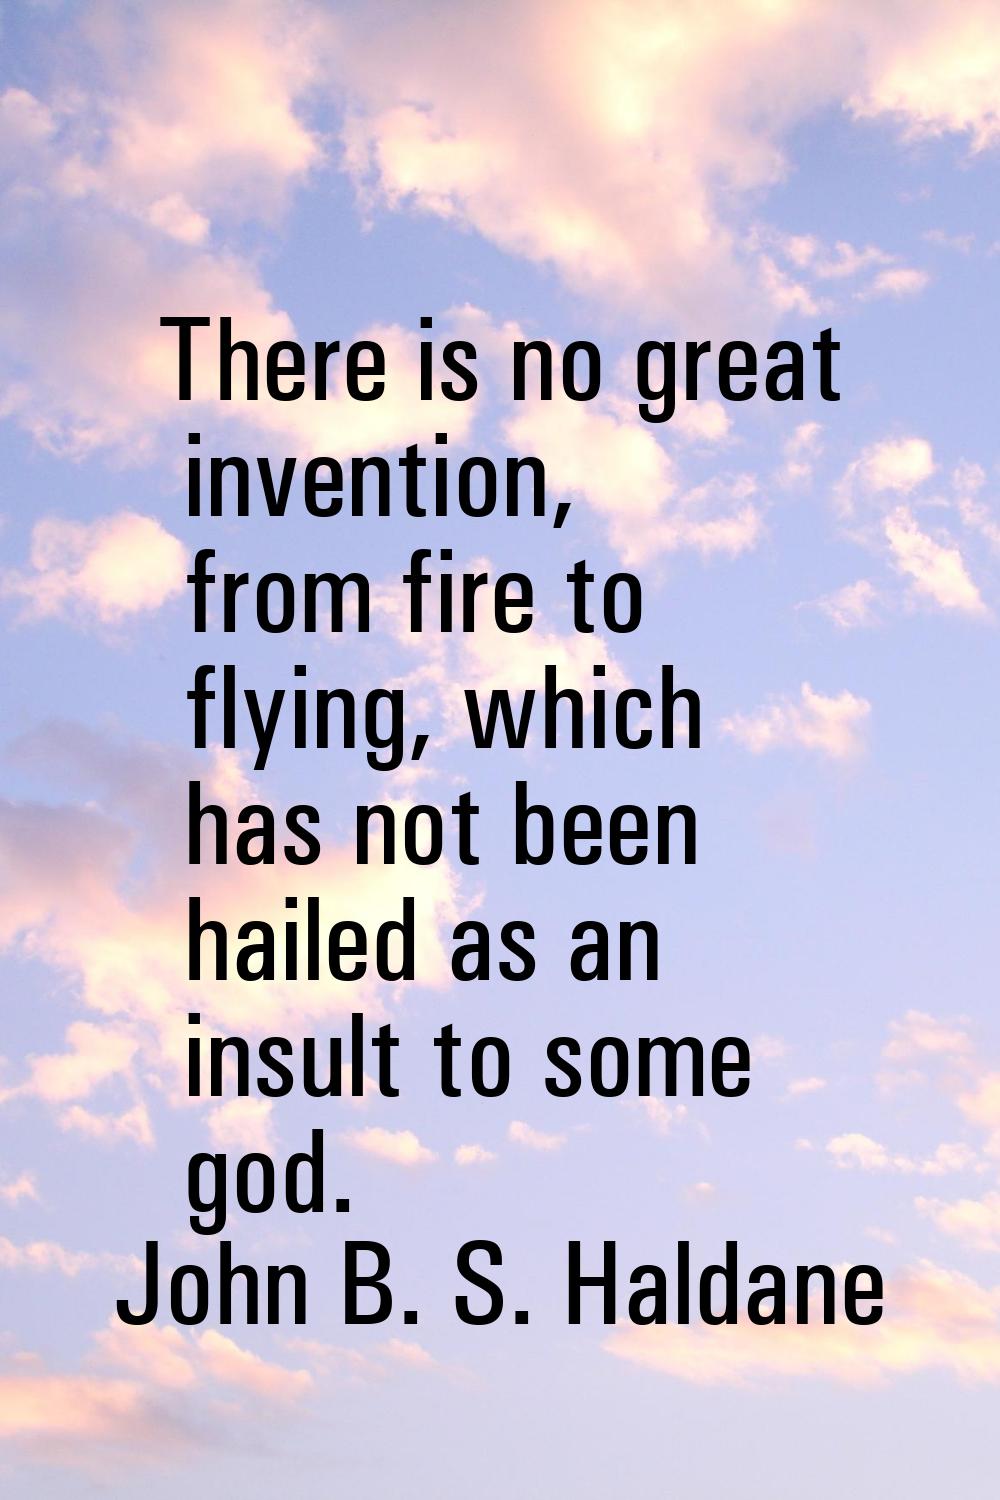 There is no great invention, from fire to flying, which has not been hailed as an insult to some go